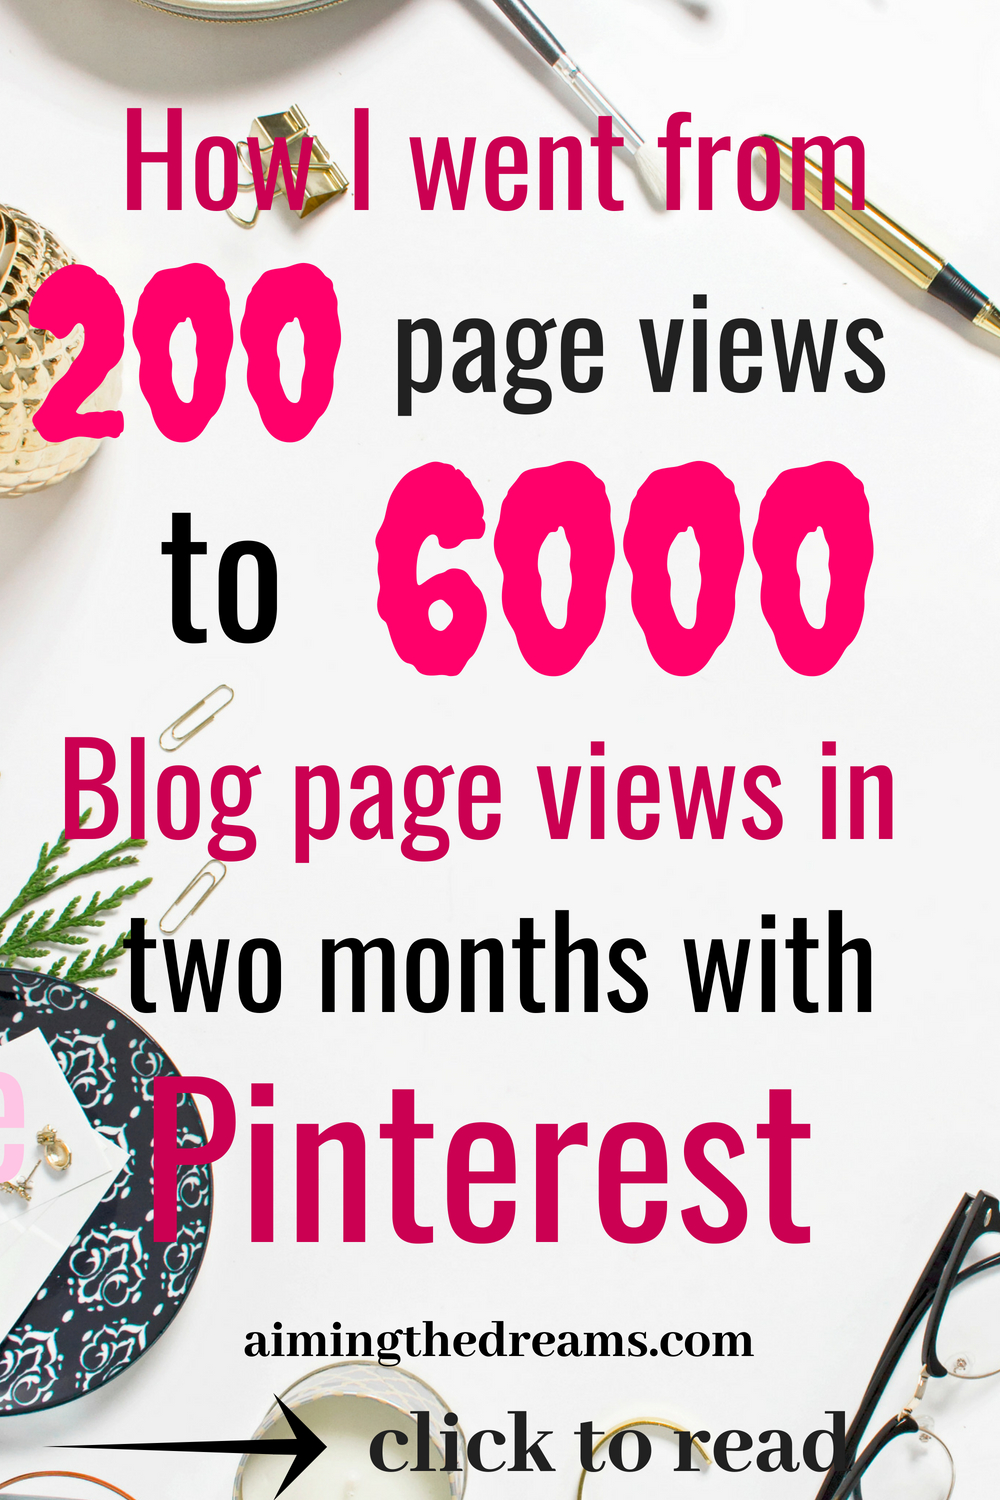 #Grow your #blog #traffic with #Pinterest. Pinterest is a goldmine of #traffic for new #bloggers. It helps in increasing #pageviews tremendously.